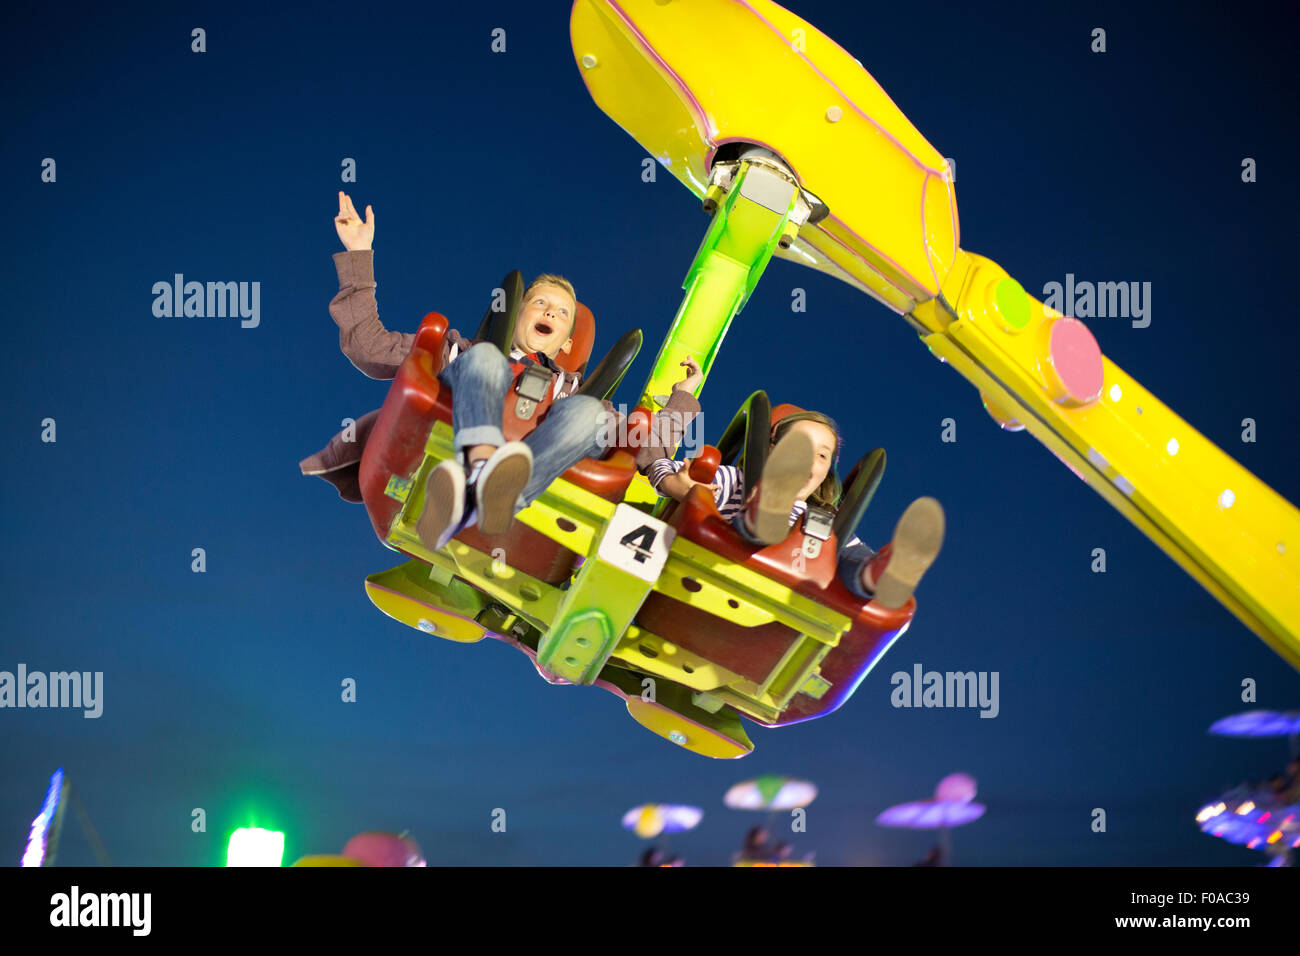 Brother and sister mid air on fairground ride at night Stock Photo